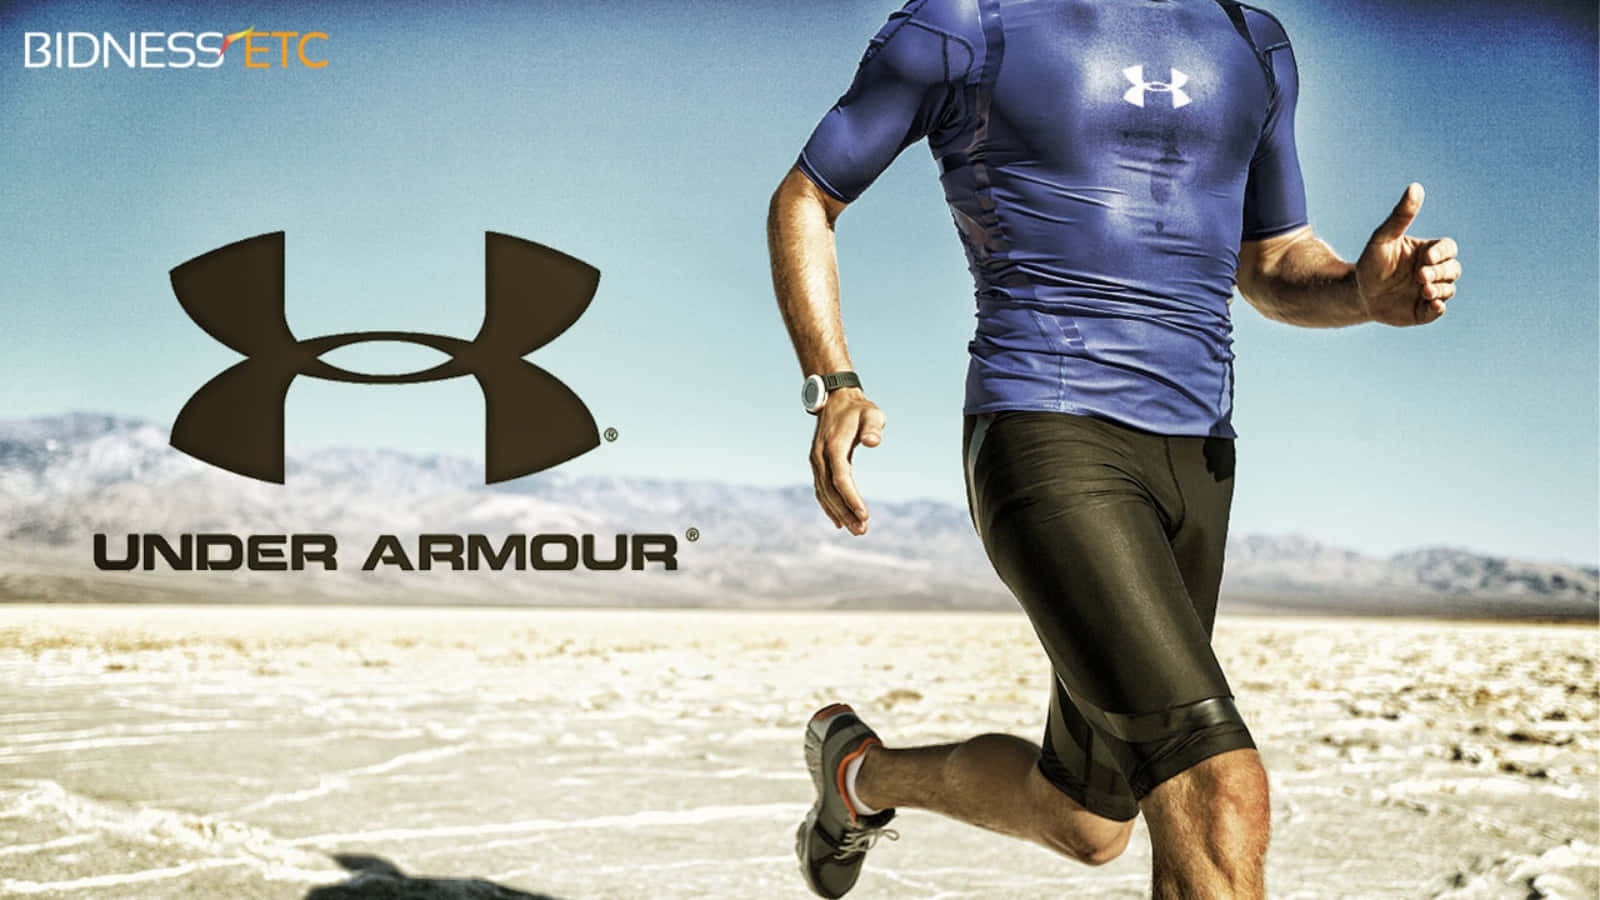 100+] Under Armour Pictures